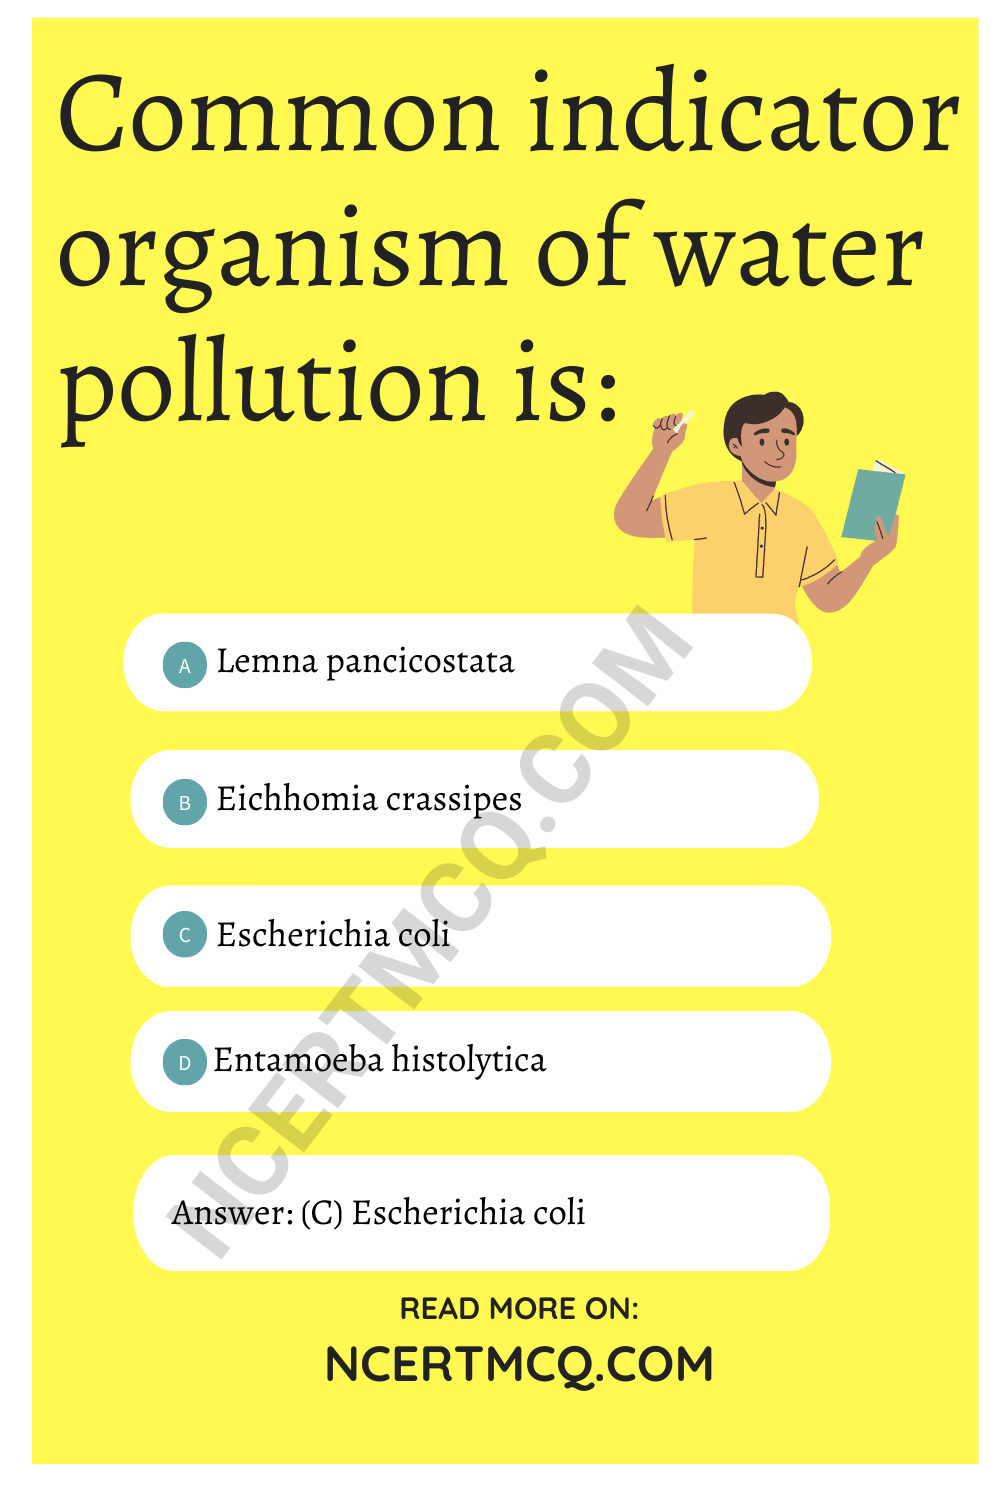 Common indicator organism of water pollution is: